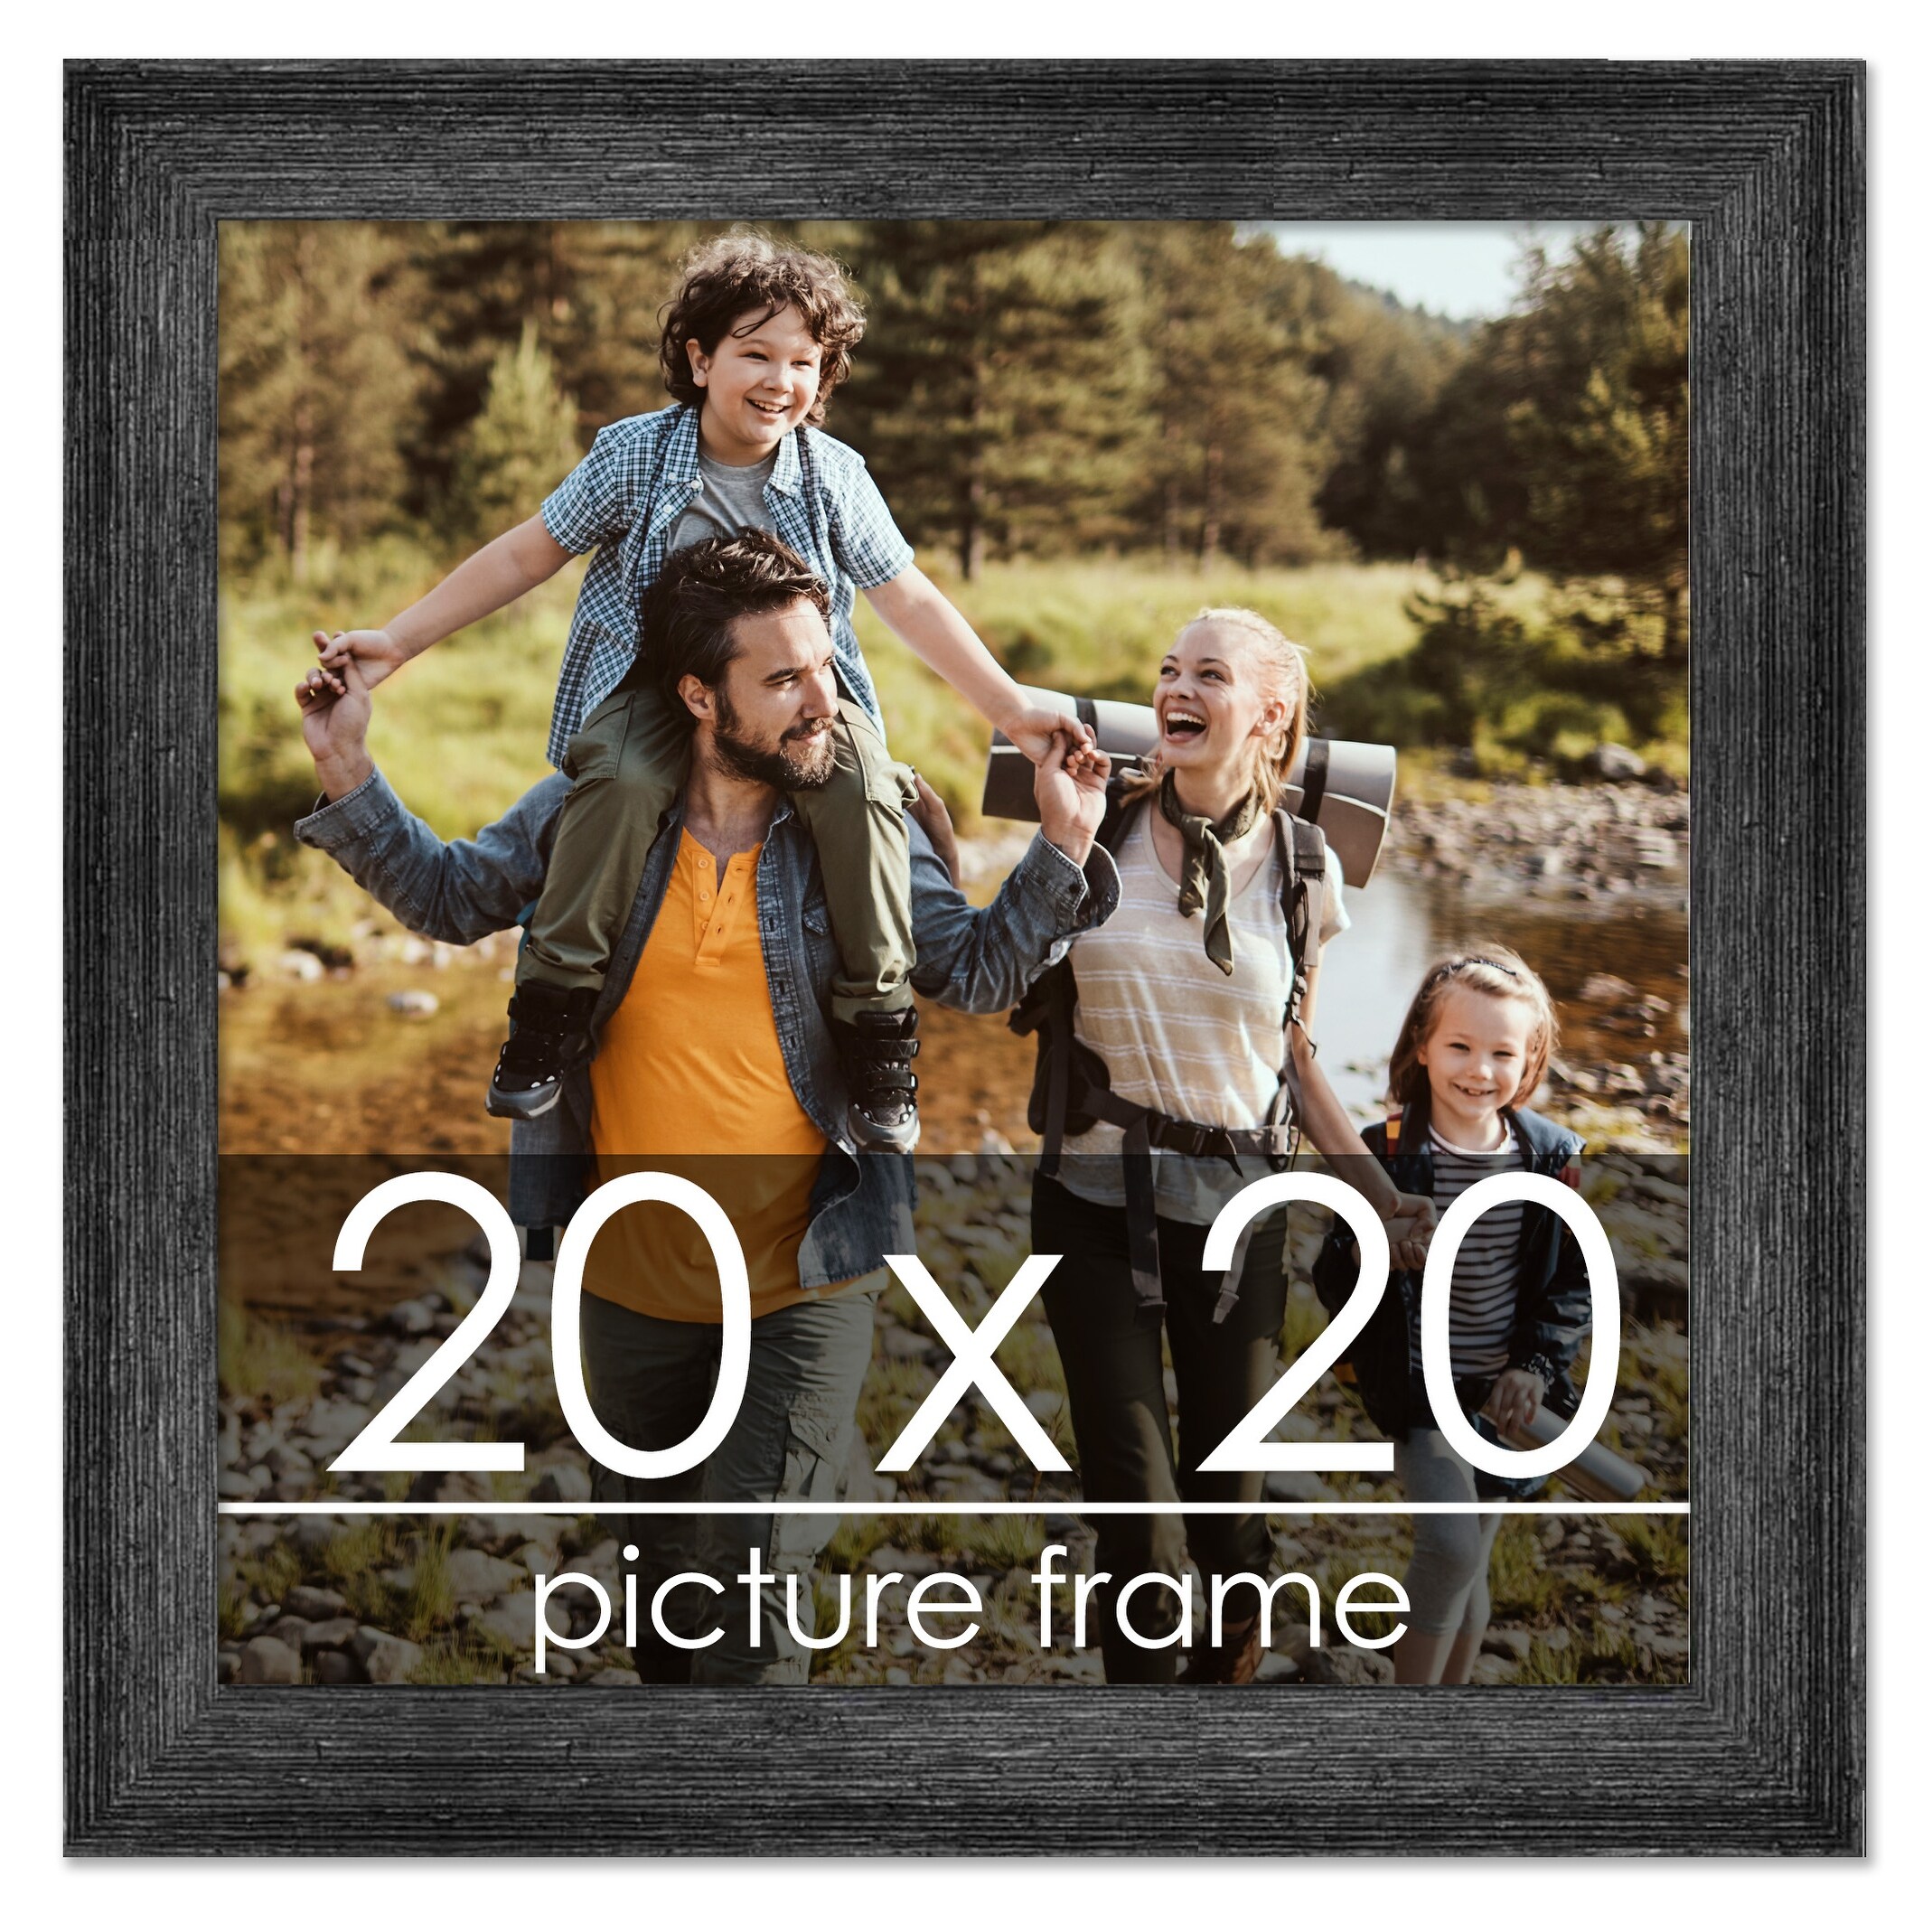 20x20 Frame White Real Wood Picture Frame Width 0.75 inches